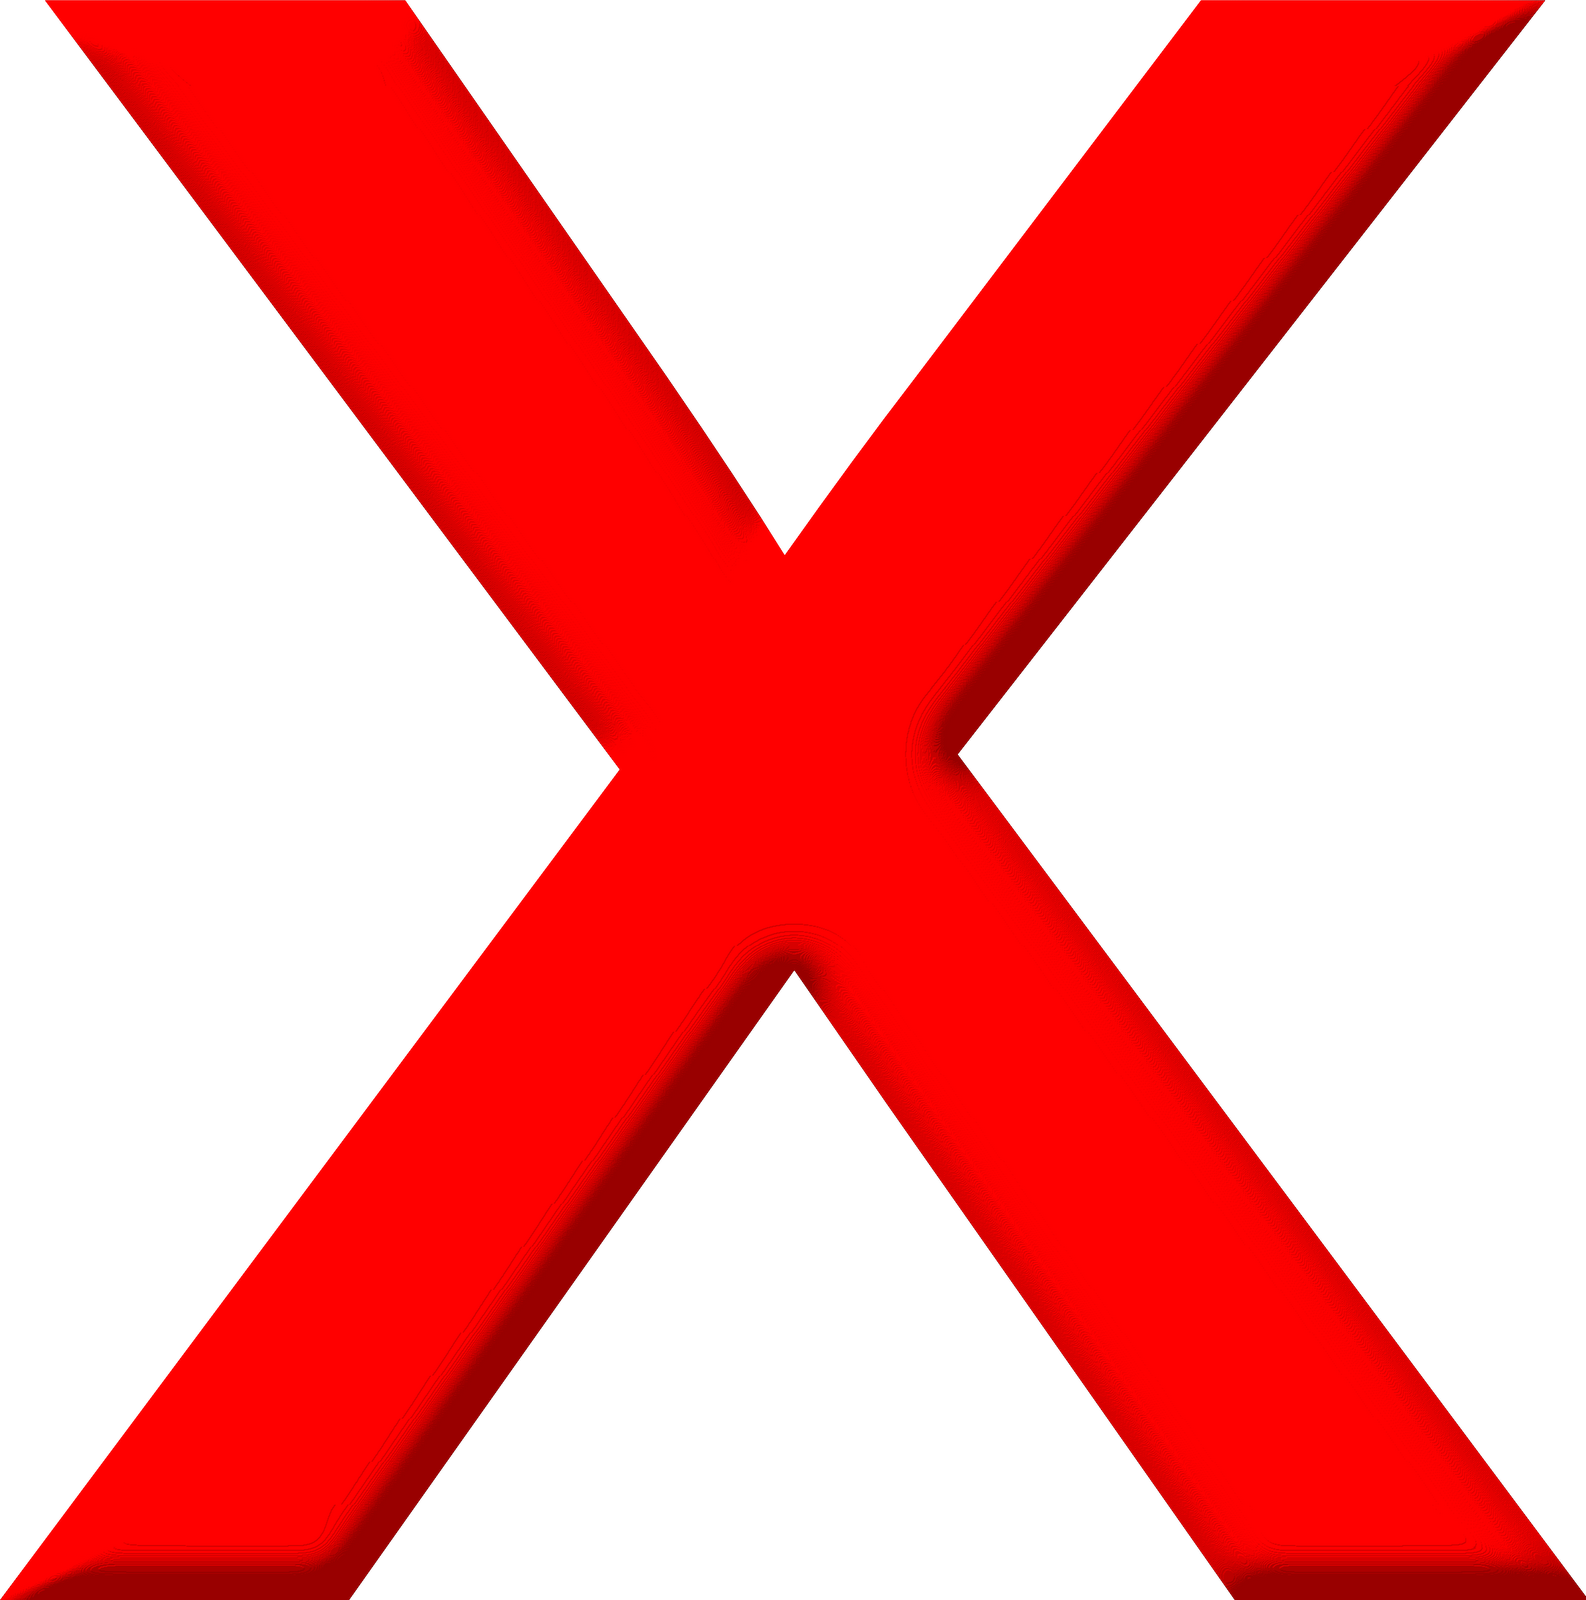 Transparent Background Red X Mark / Most popular red icon groups